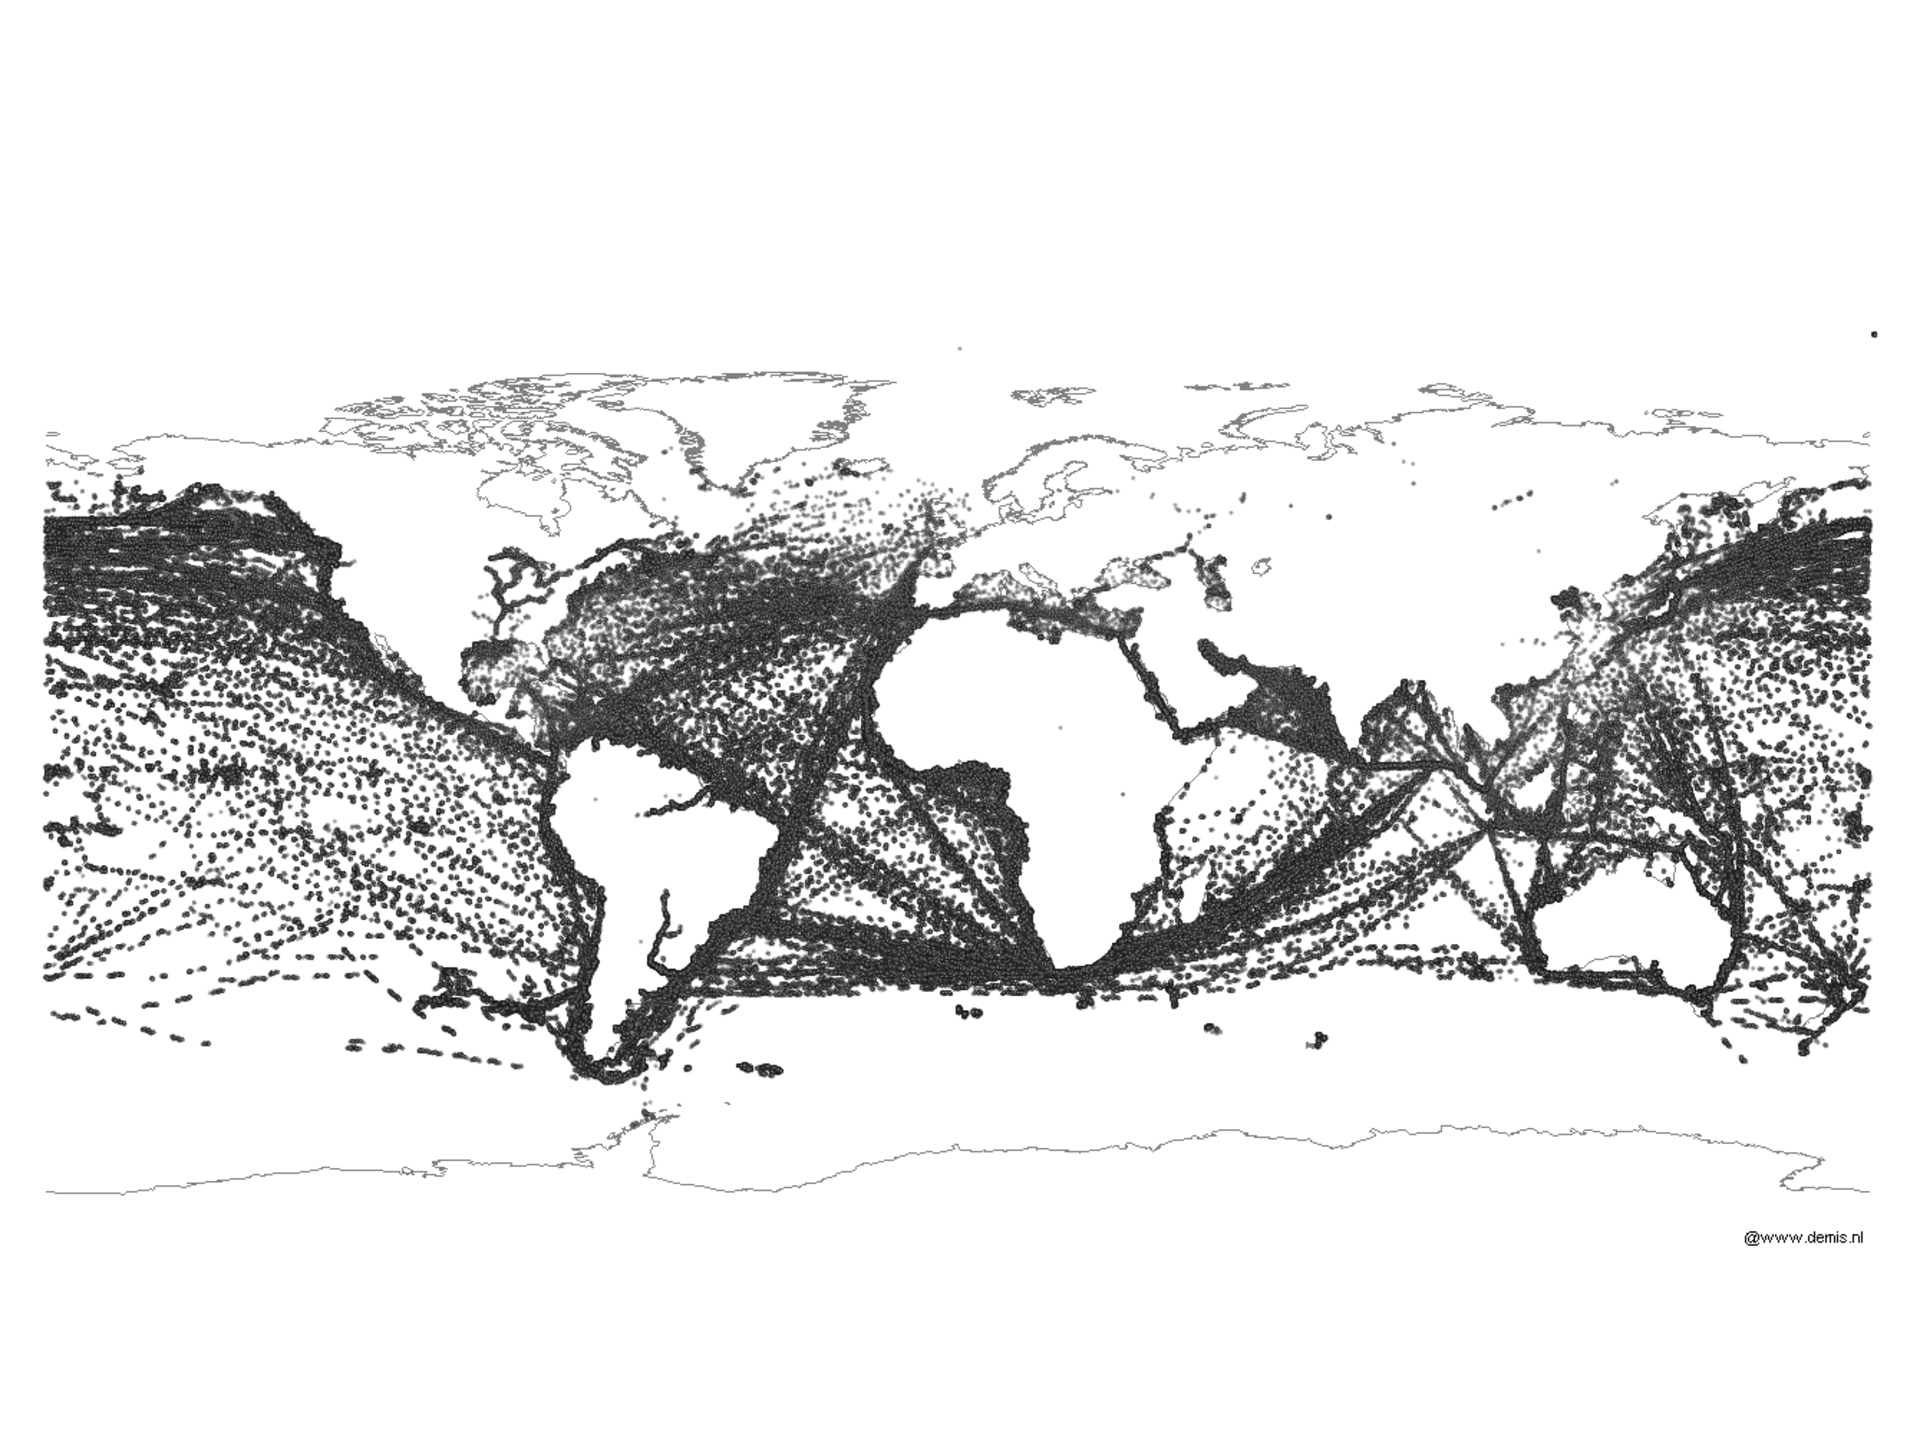 Ship routes plotted over time